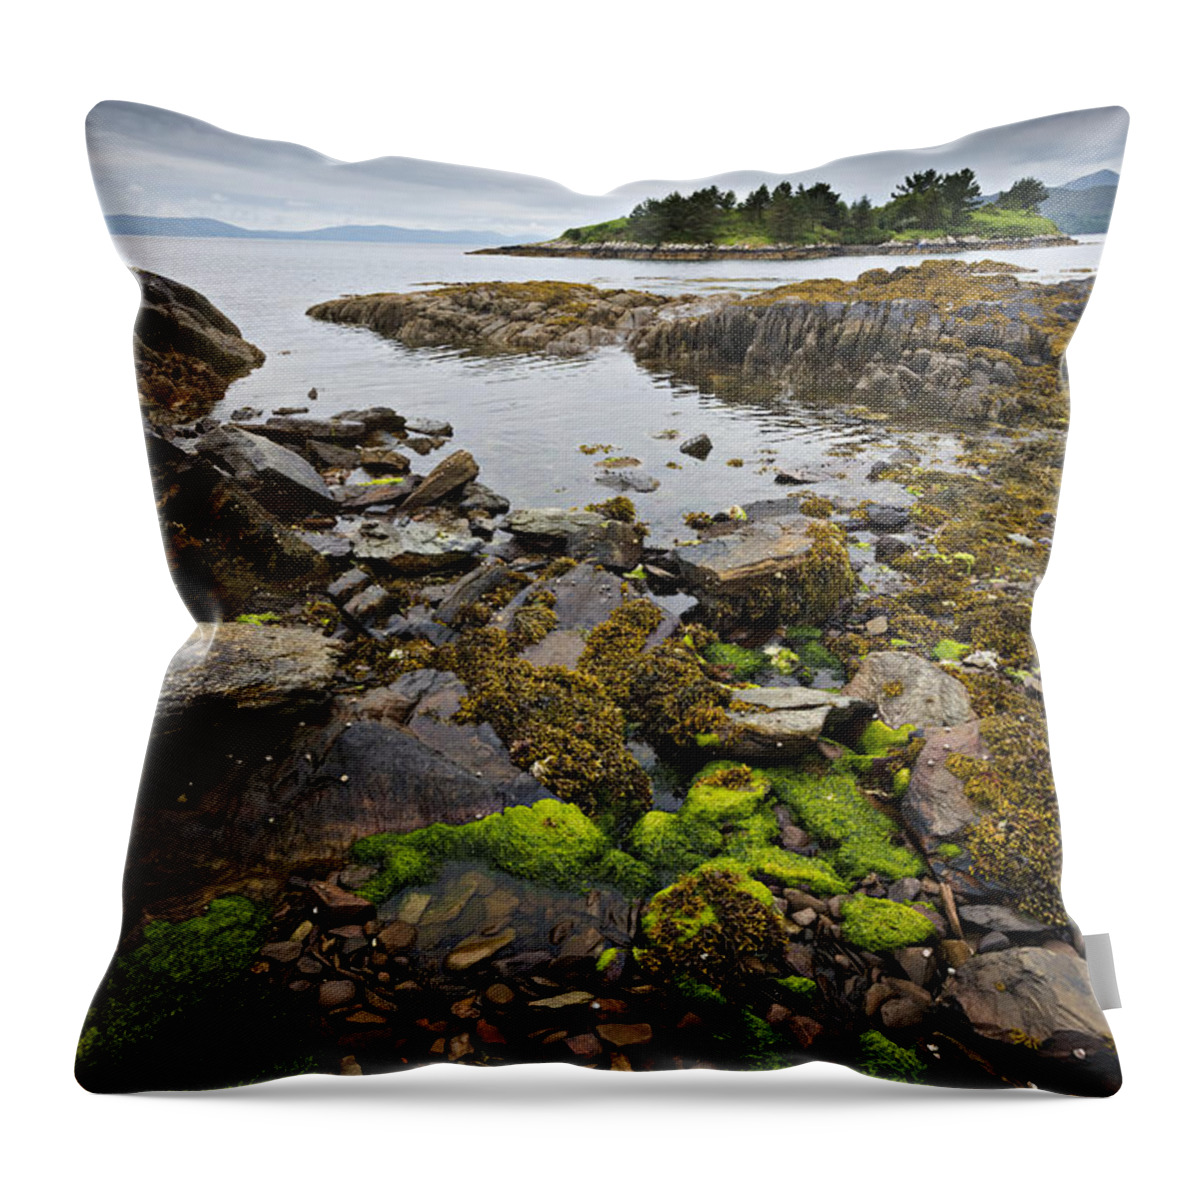 Ireland Throw Pillow featuring the photograph Quiet Bay by Dan McGeorge